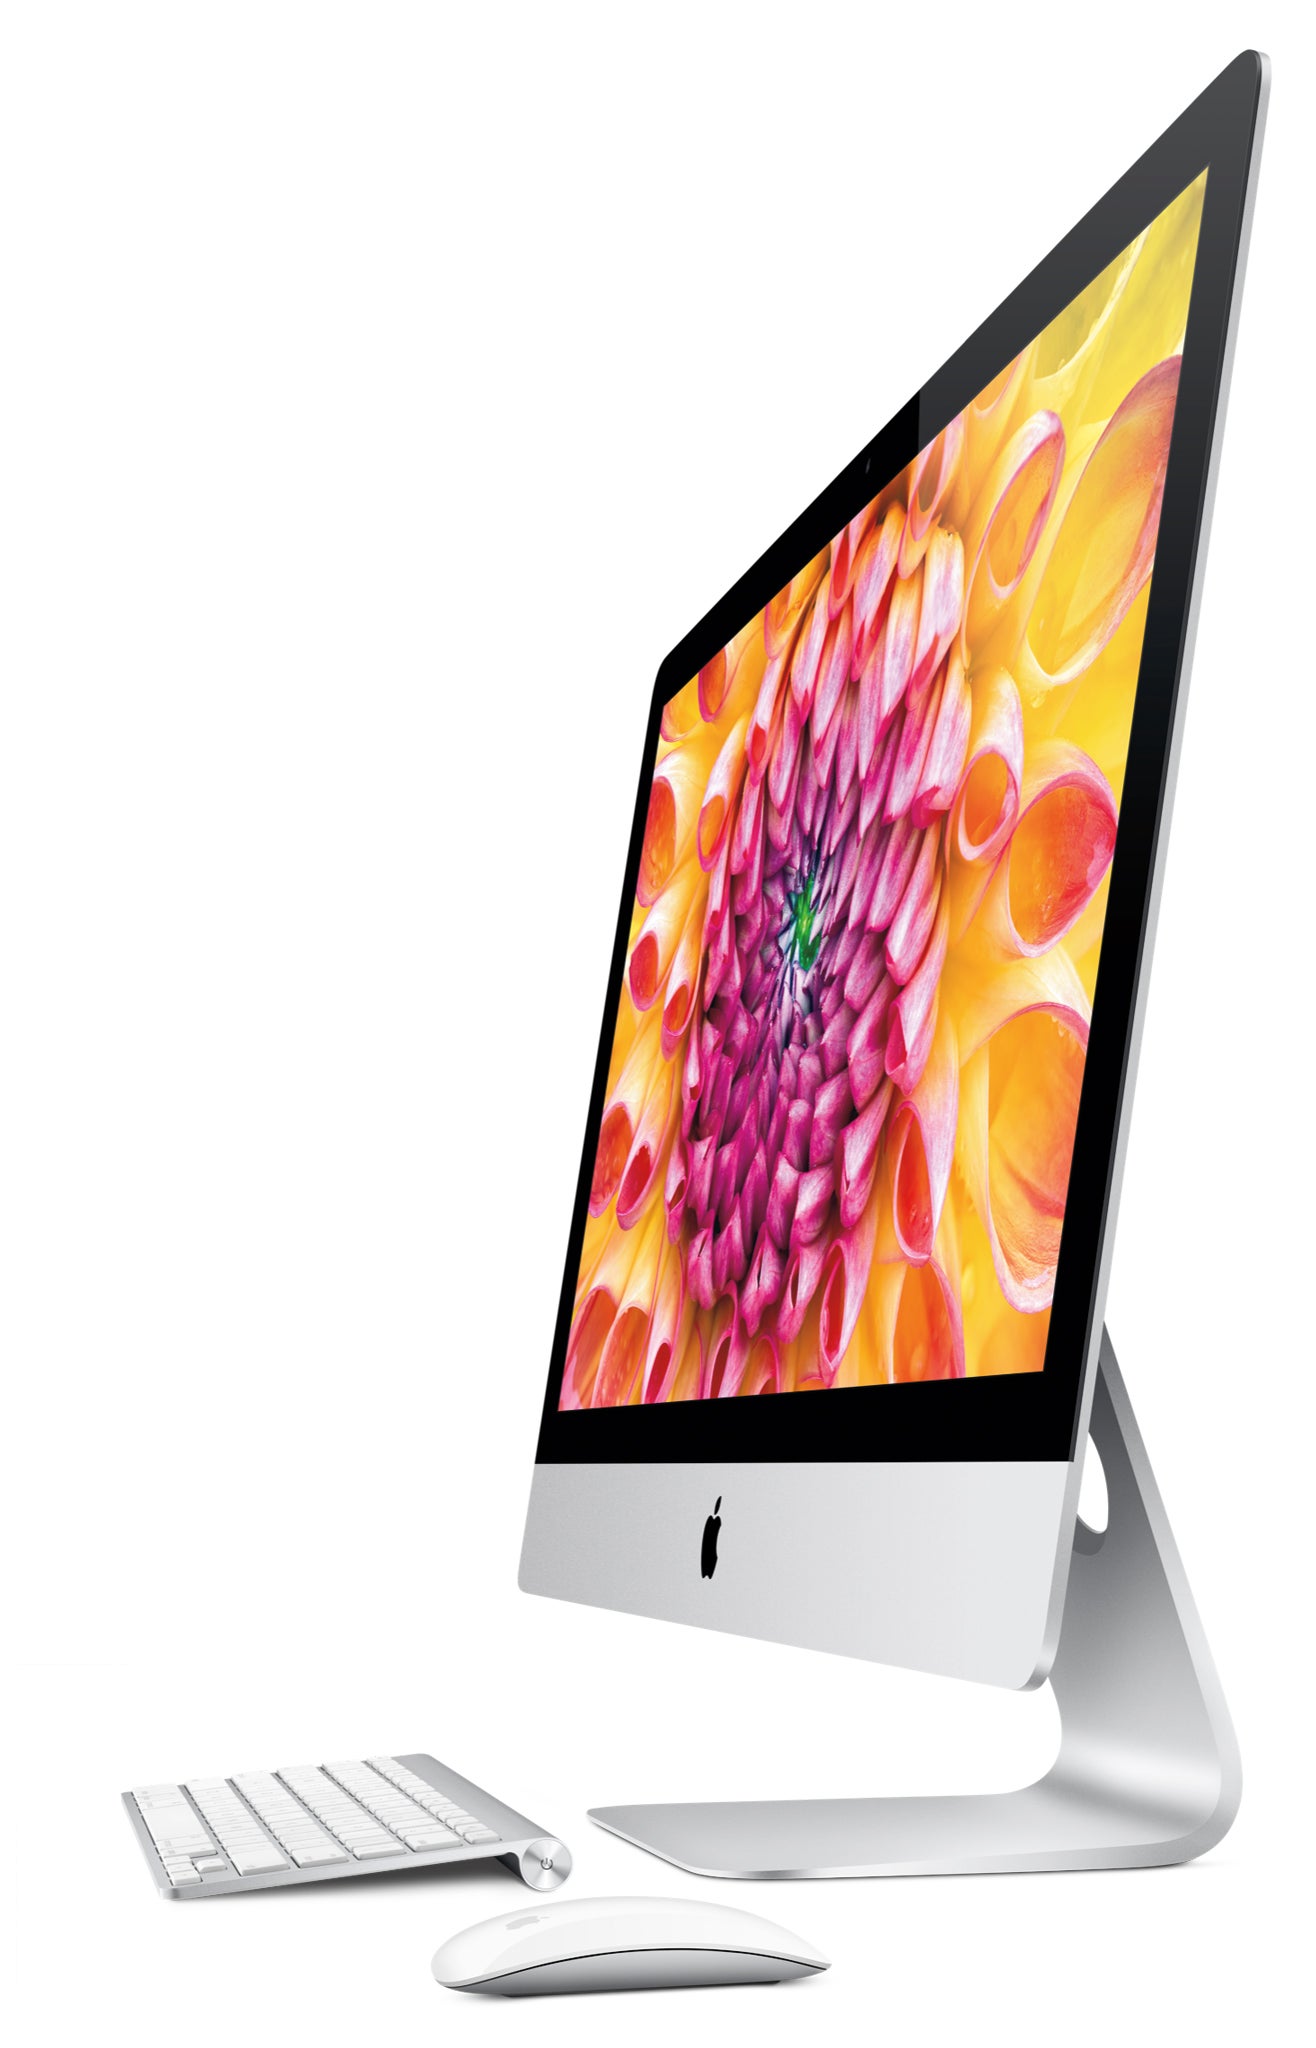 From most angles, the iMac looks catwalk-thin